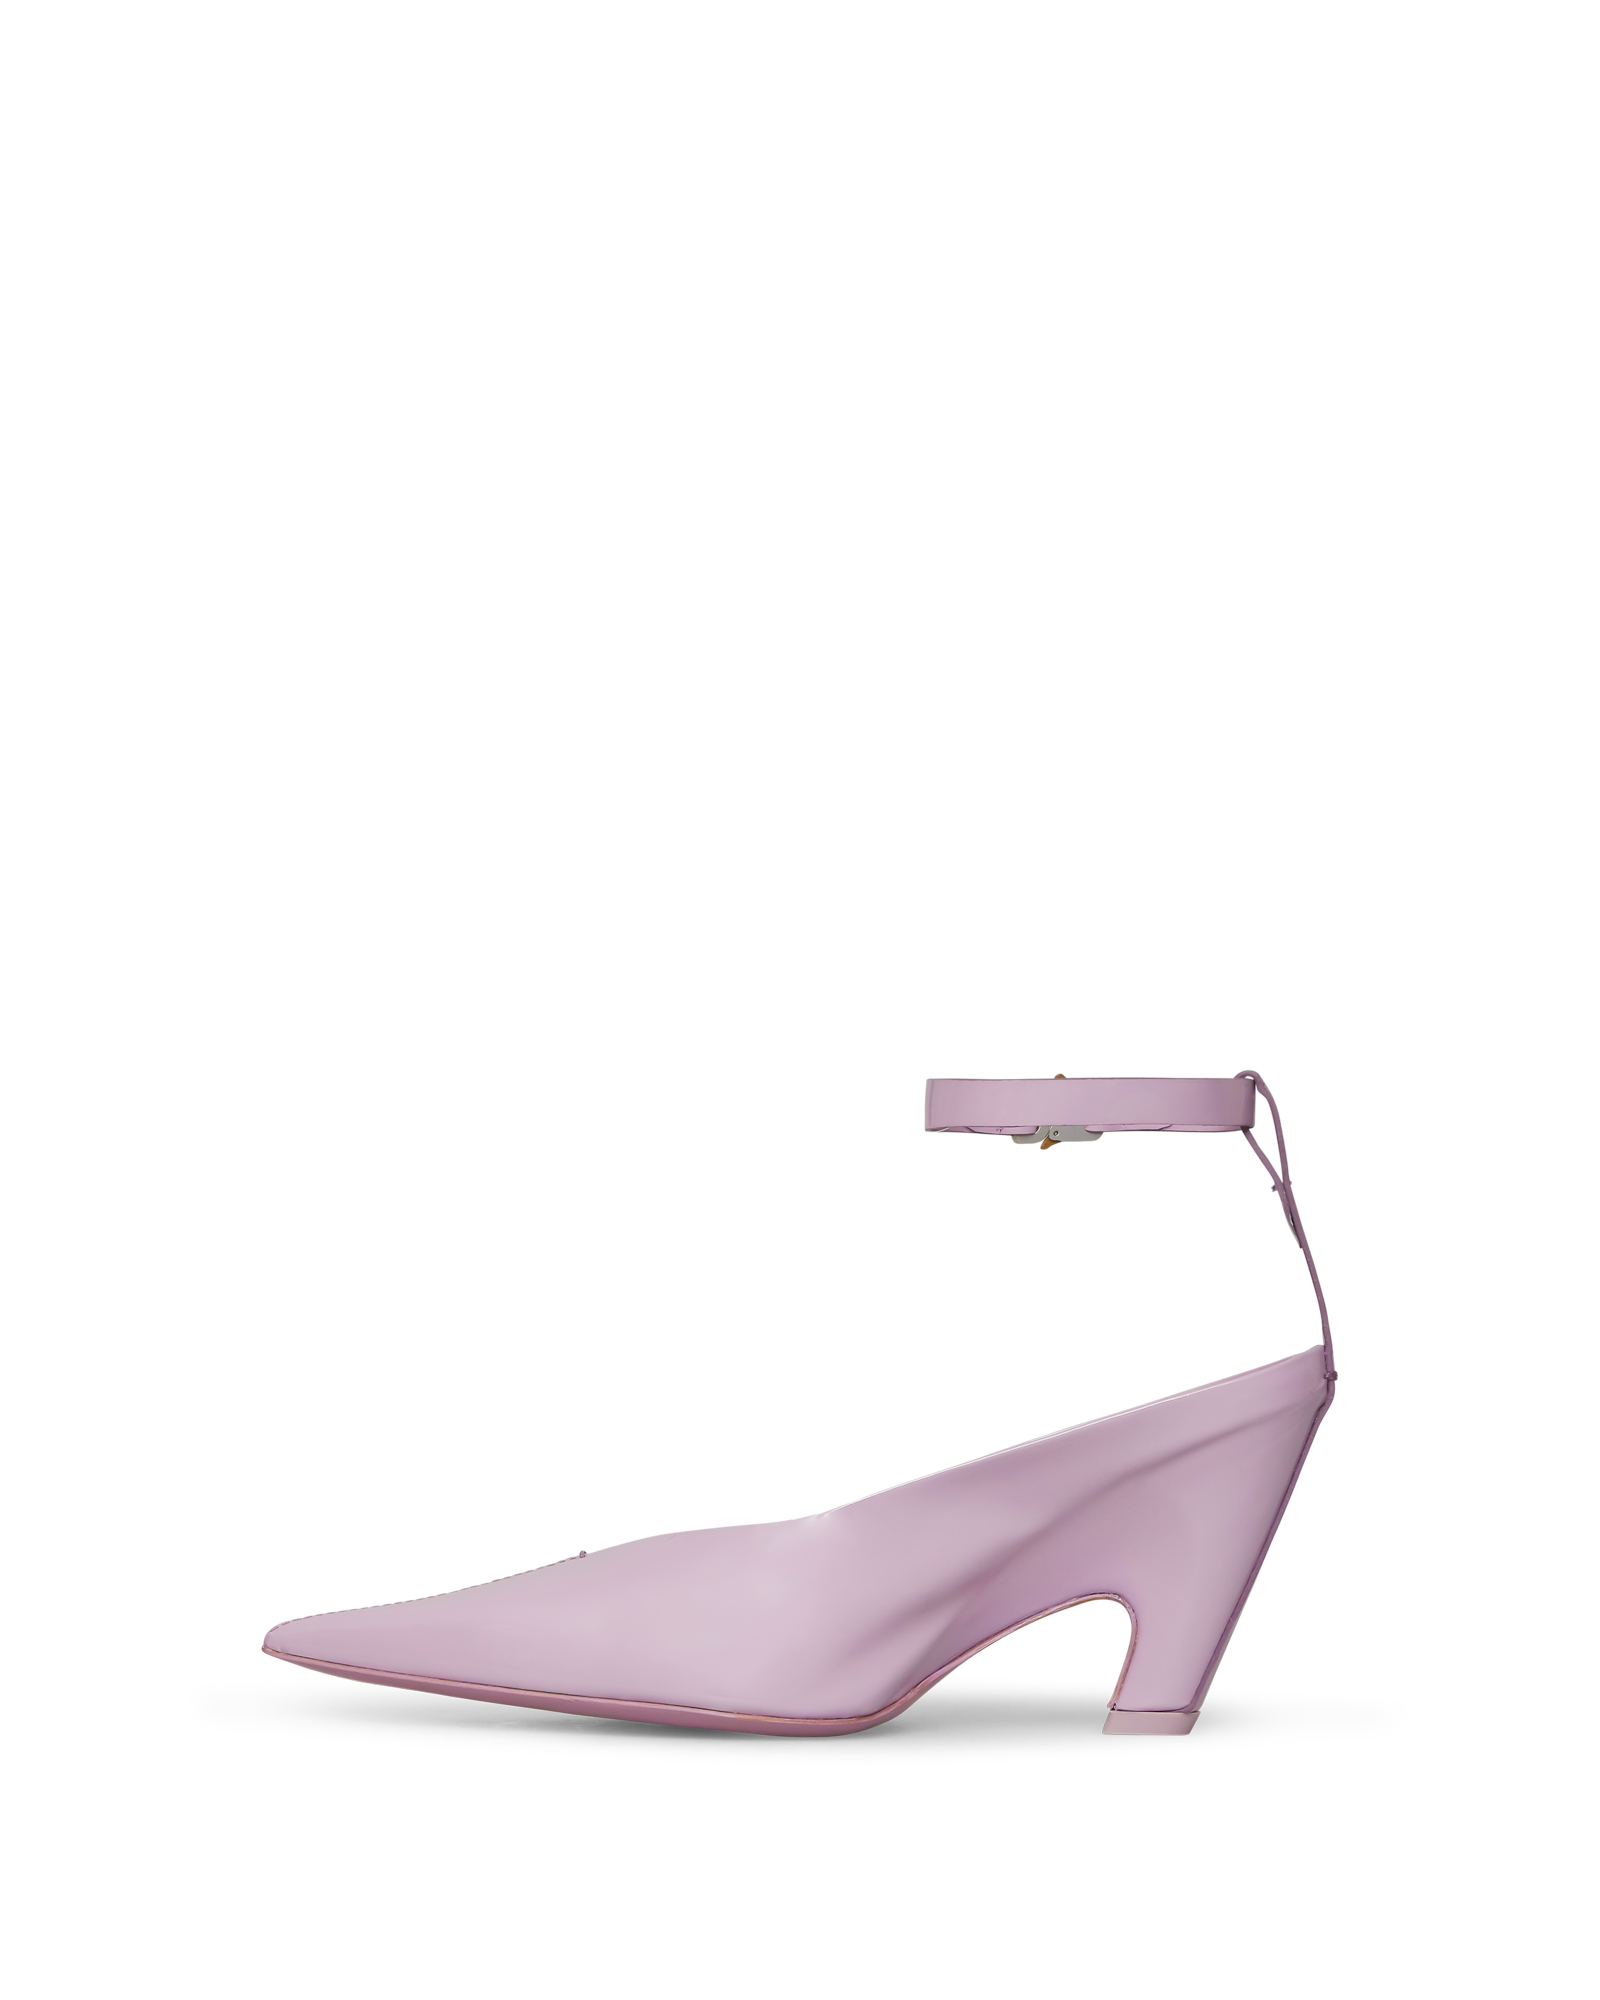 EVE HEEL WITH BUCKLE ANKLE STRAP